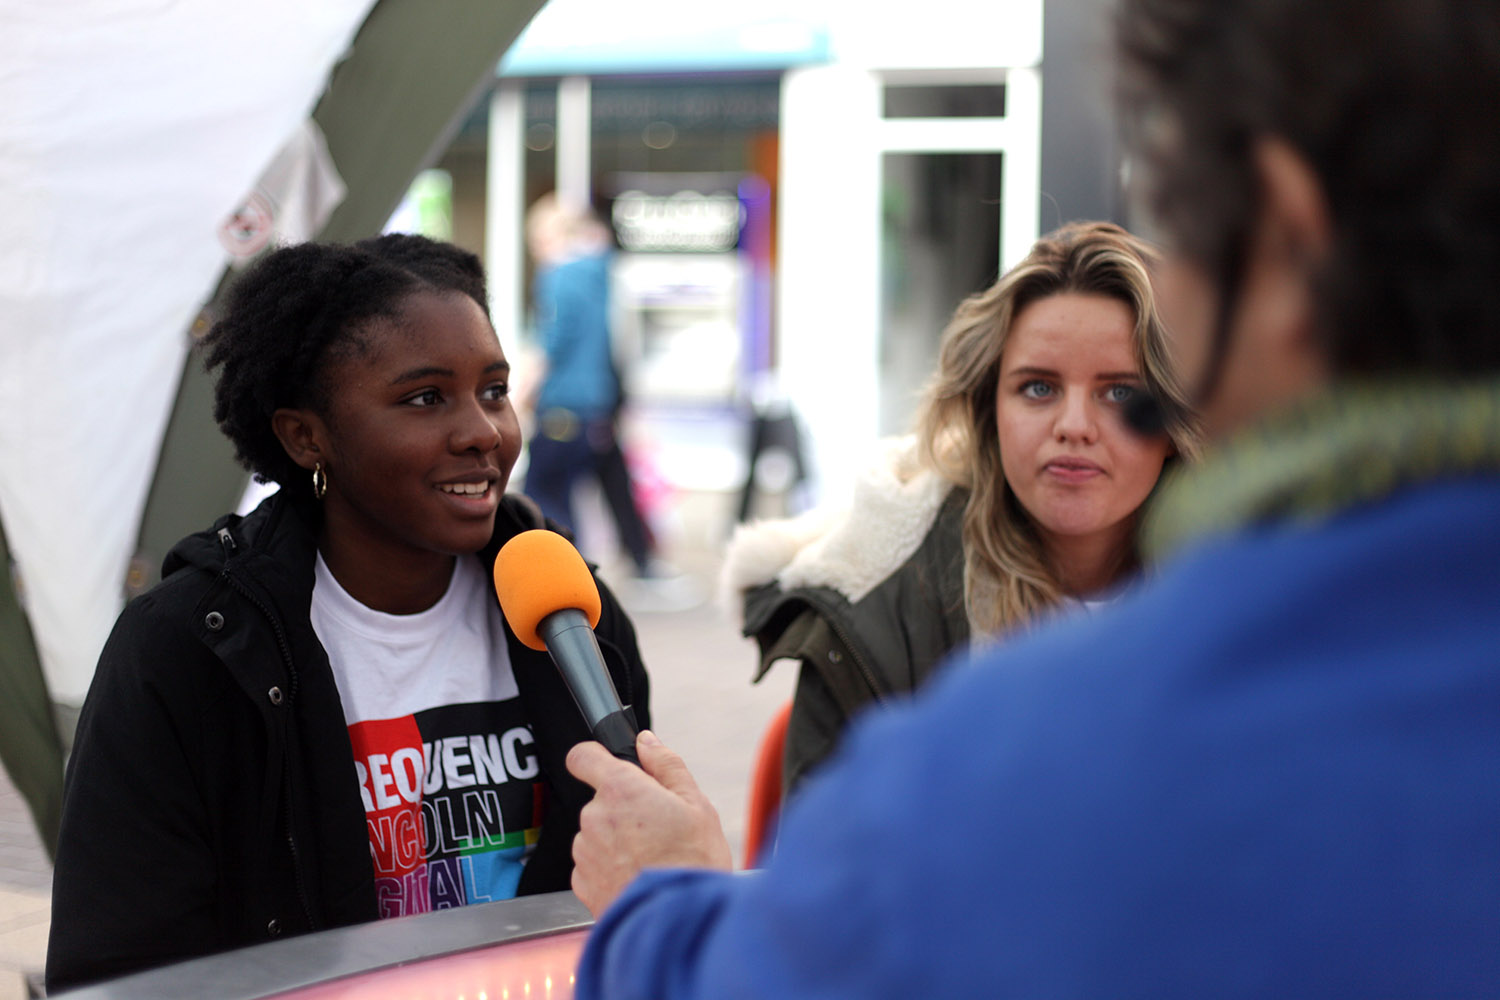 Two young women, one black one white, are speaking into a microphone for an interview in the street.